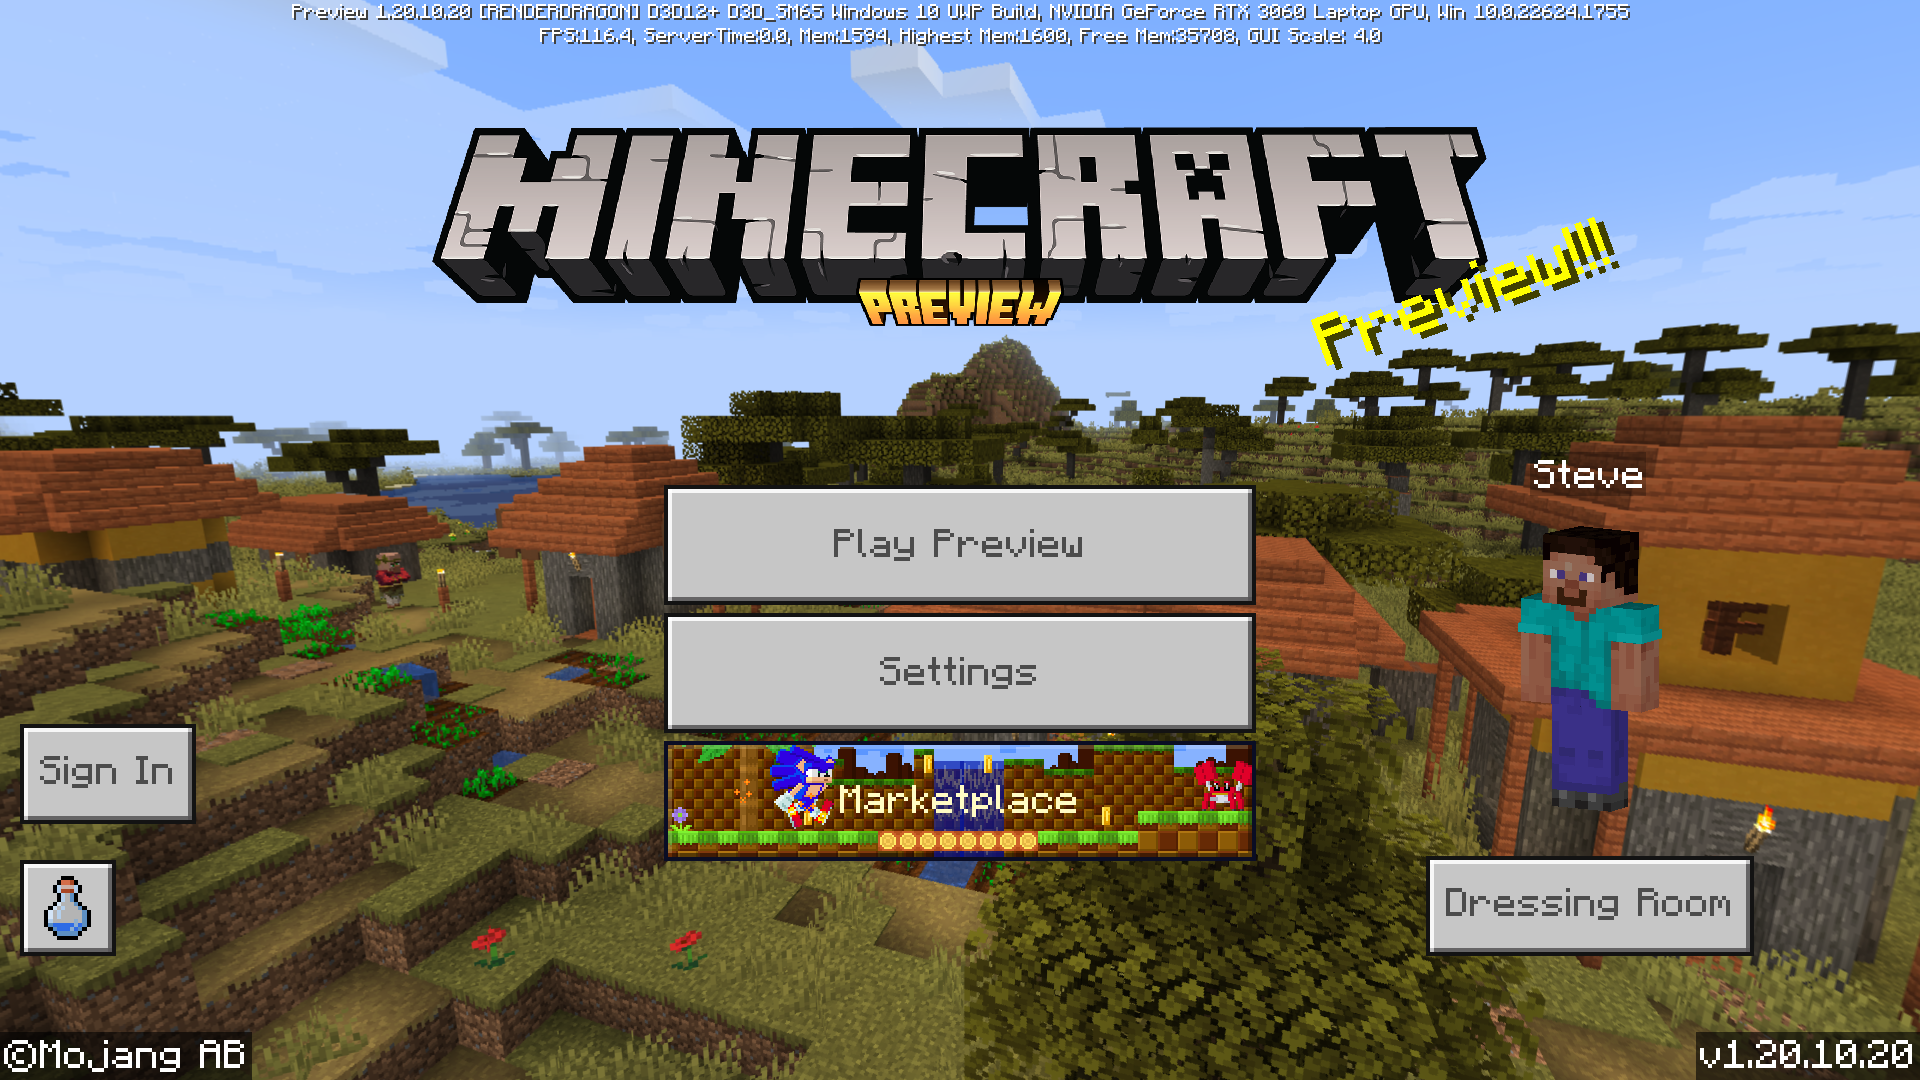 Download Minecraft PE 1.19.50.21 apk free: Camel and Bamboo